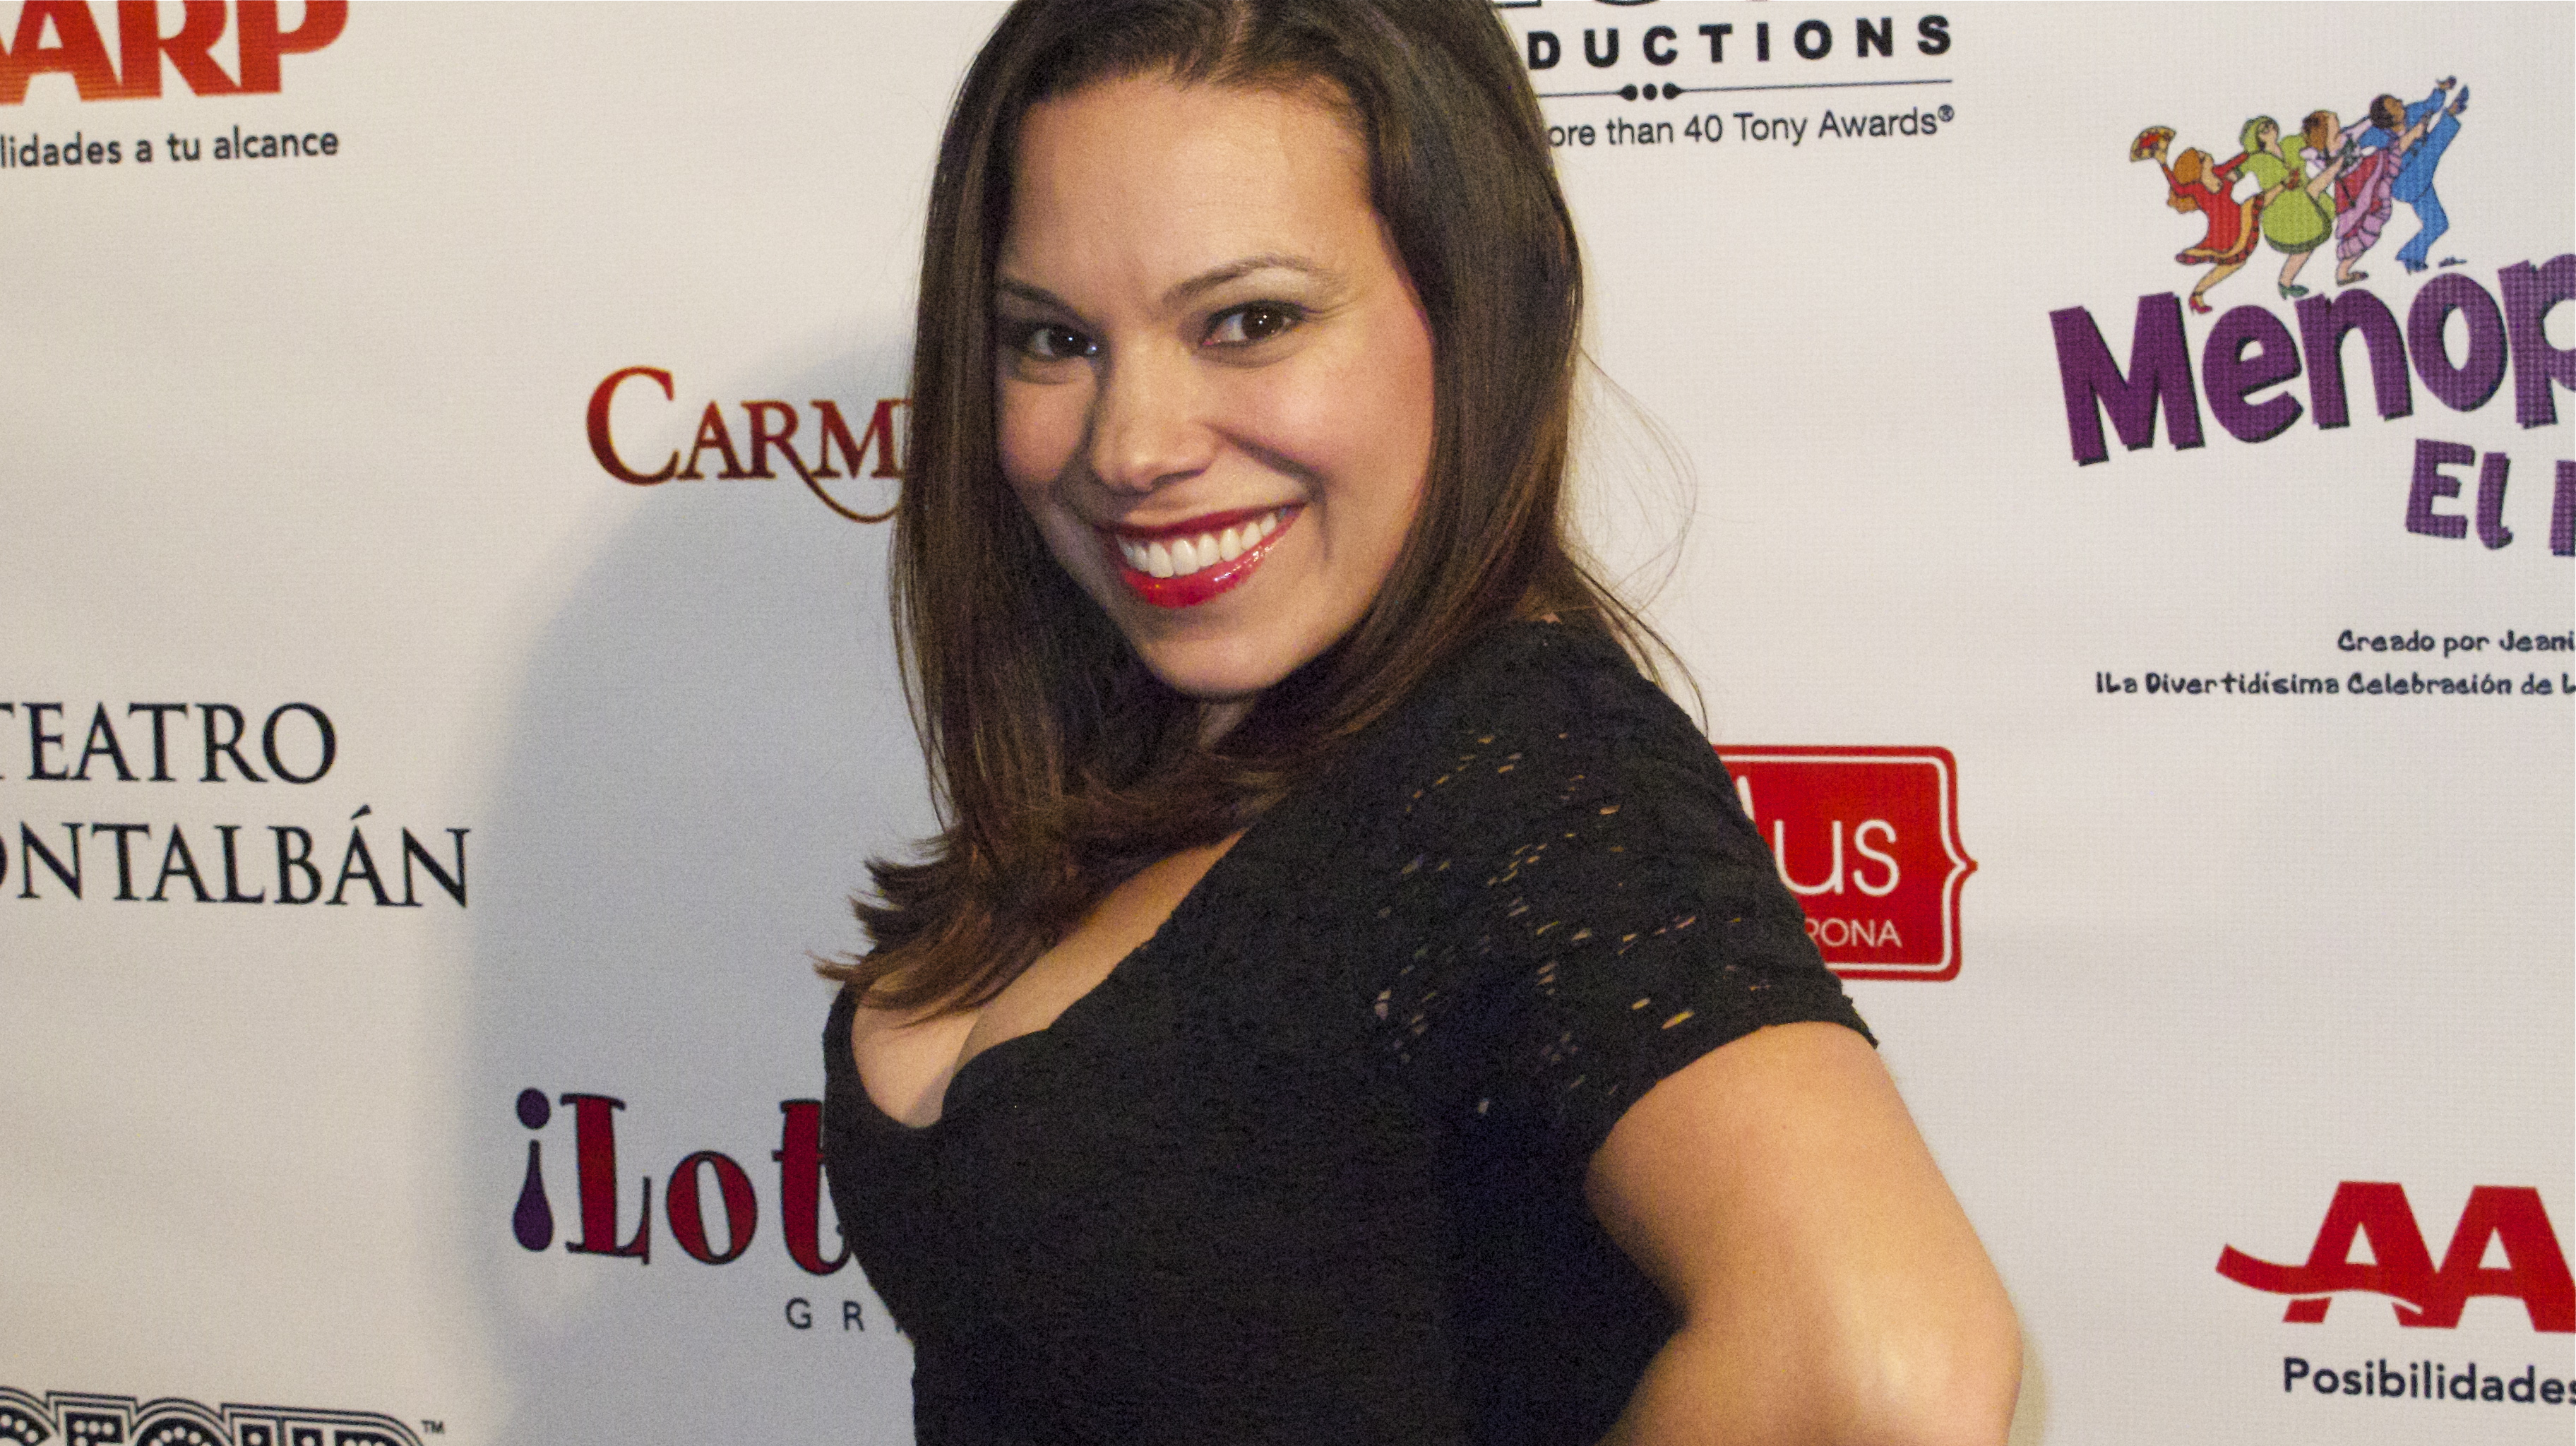 Actress Gloria Garayua at the Opening night of Menopausia El Musical in Hollywood, CA on Oct 17, 2013.